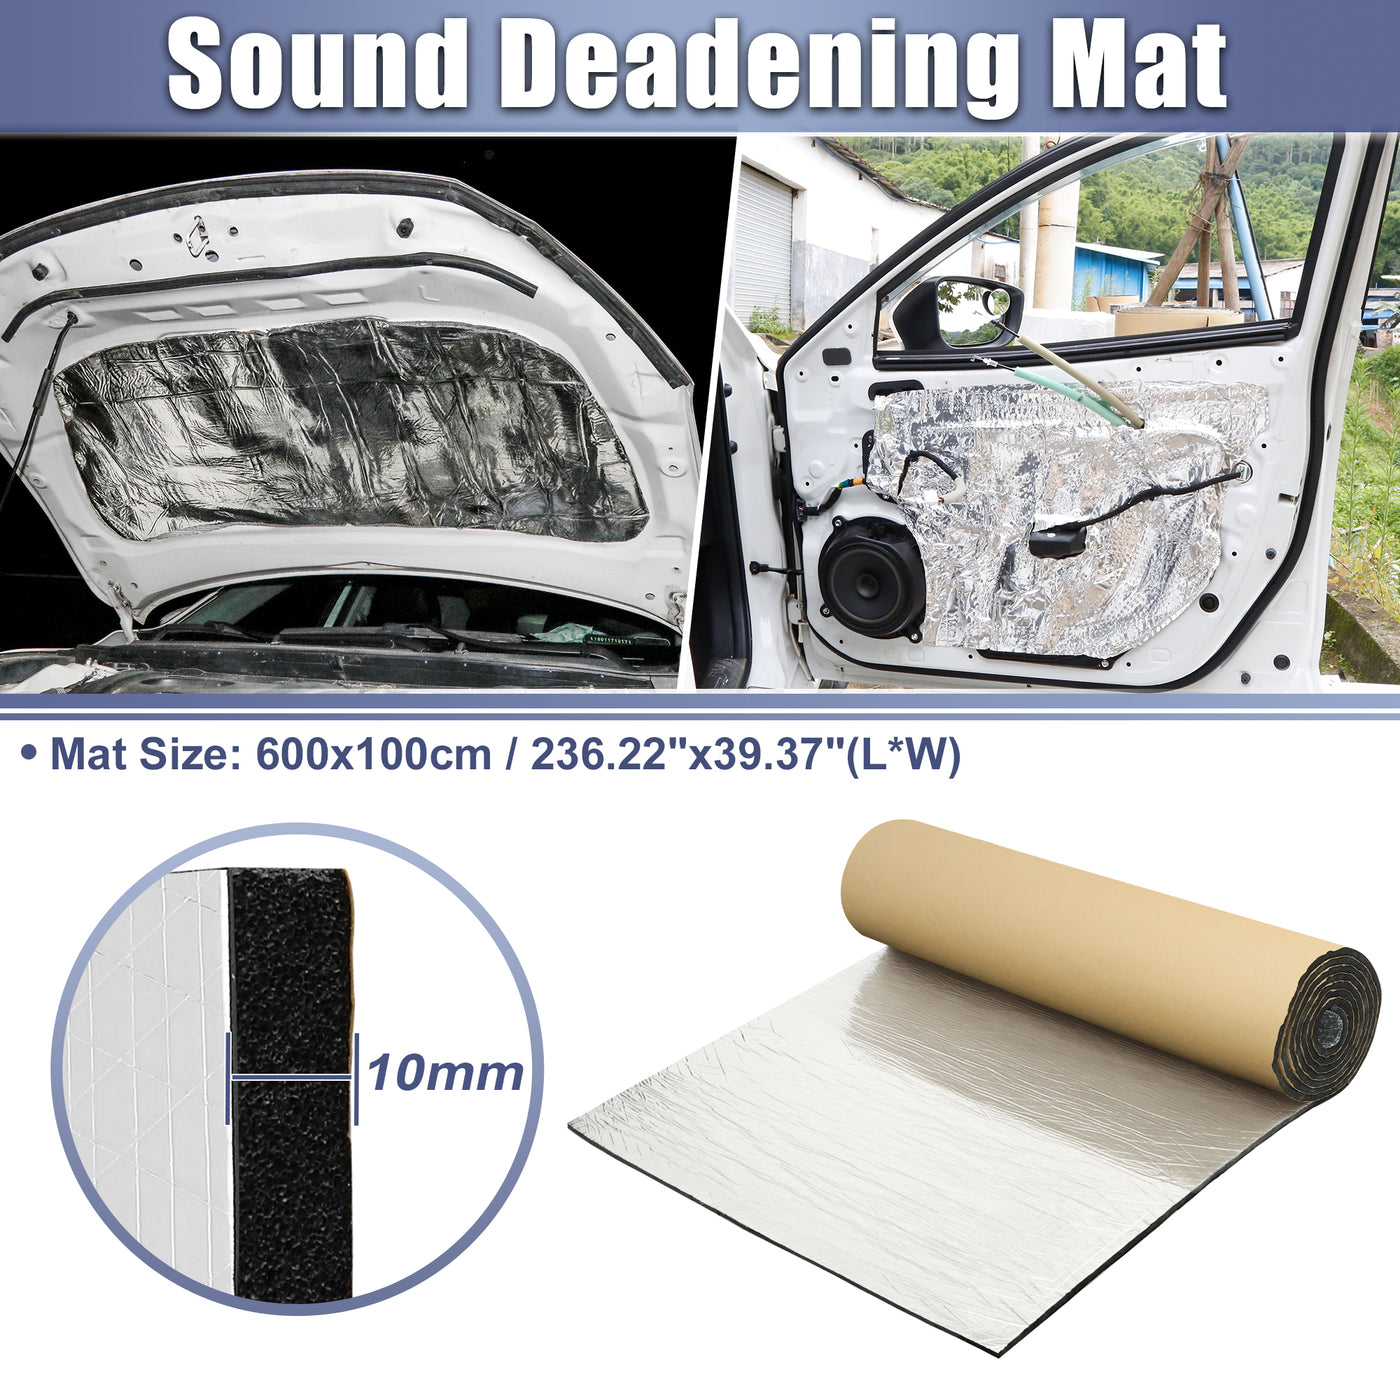 X AUTOHAUX 394mil 10mm 64.58sqft Car Sound Deadening Mat Aluminum Foil Closed Cell Foam Heat Shield Material Self Adhesive Universal for Hood Fender and Boat Engine Cover 236.22"x39.37"